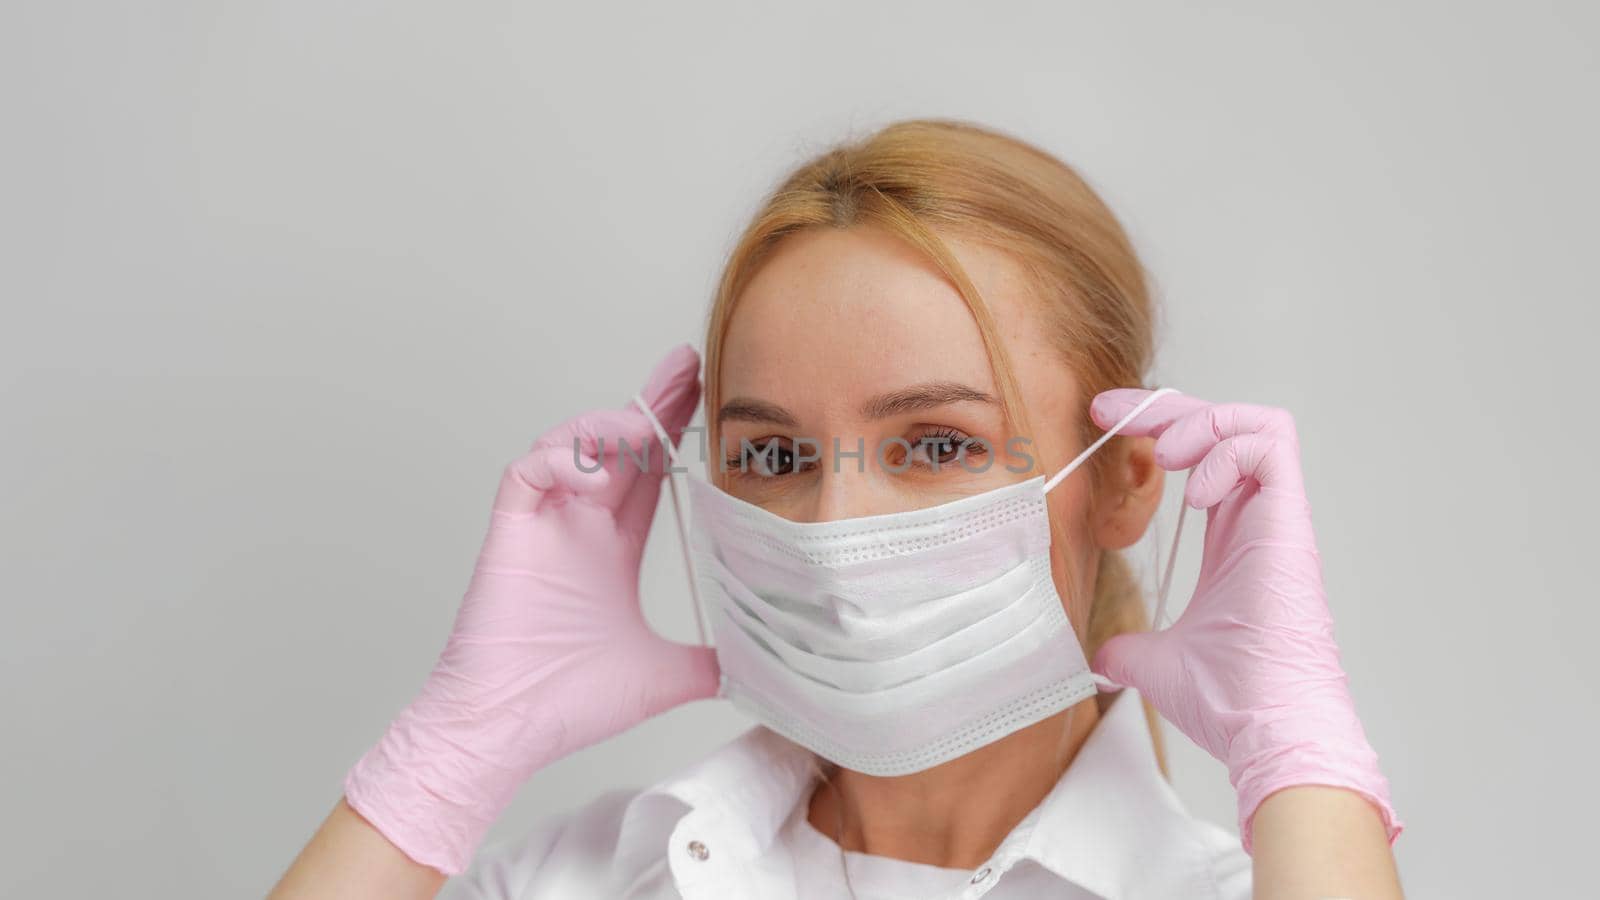 The doctor puts on a mask. Close-up portrait of medical staff. A woman in a protective mask .Isolated on a white background. Healthcare, cosmetology and medical concept by Matiunina